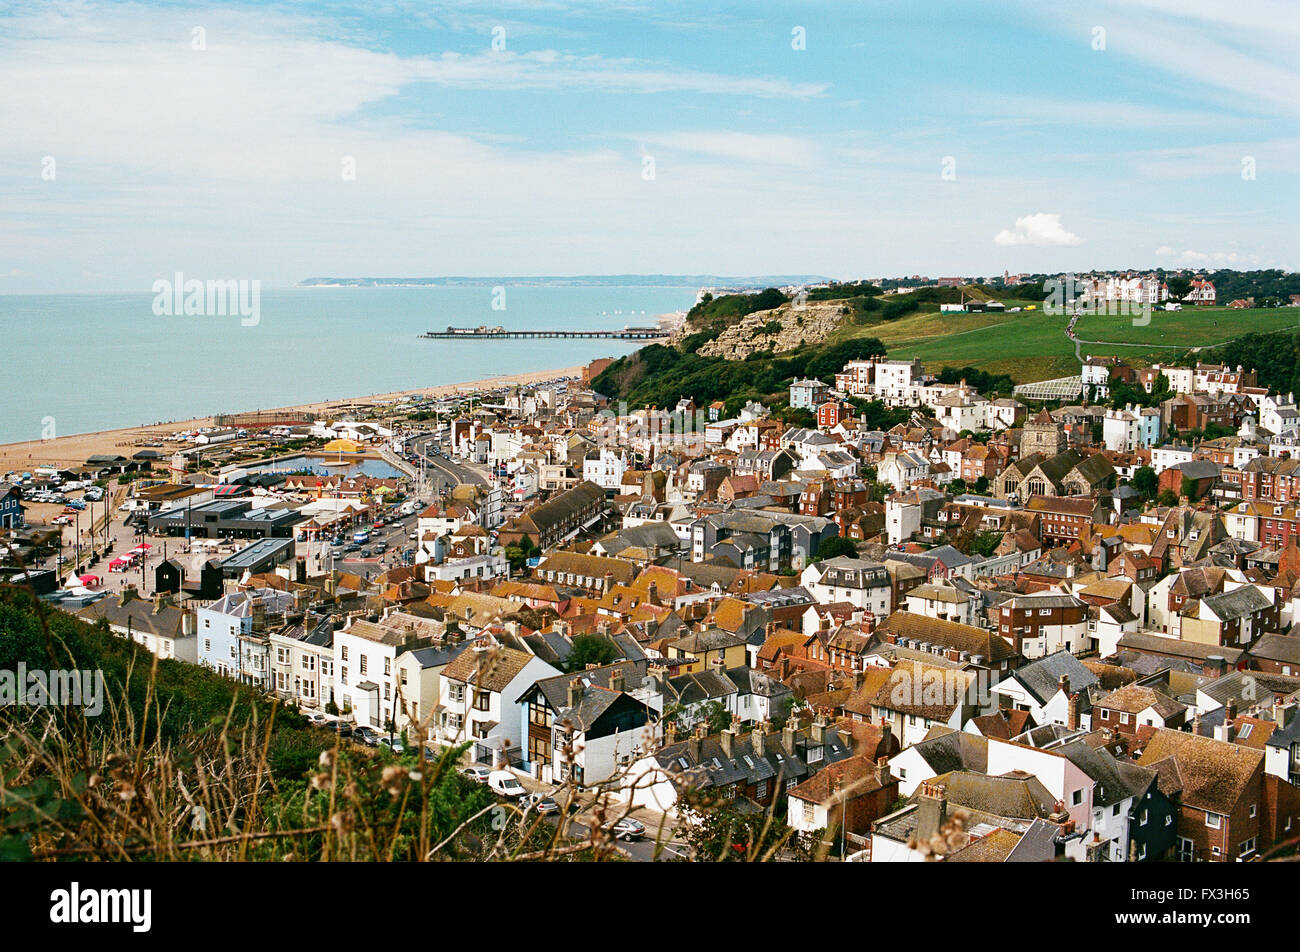 Hastings, Sussex, England on the South Coast Stock Photo